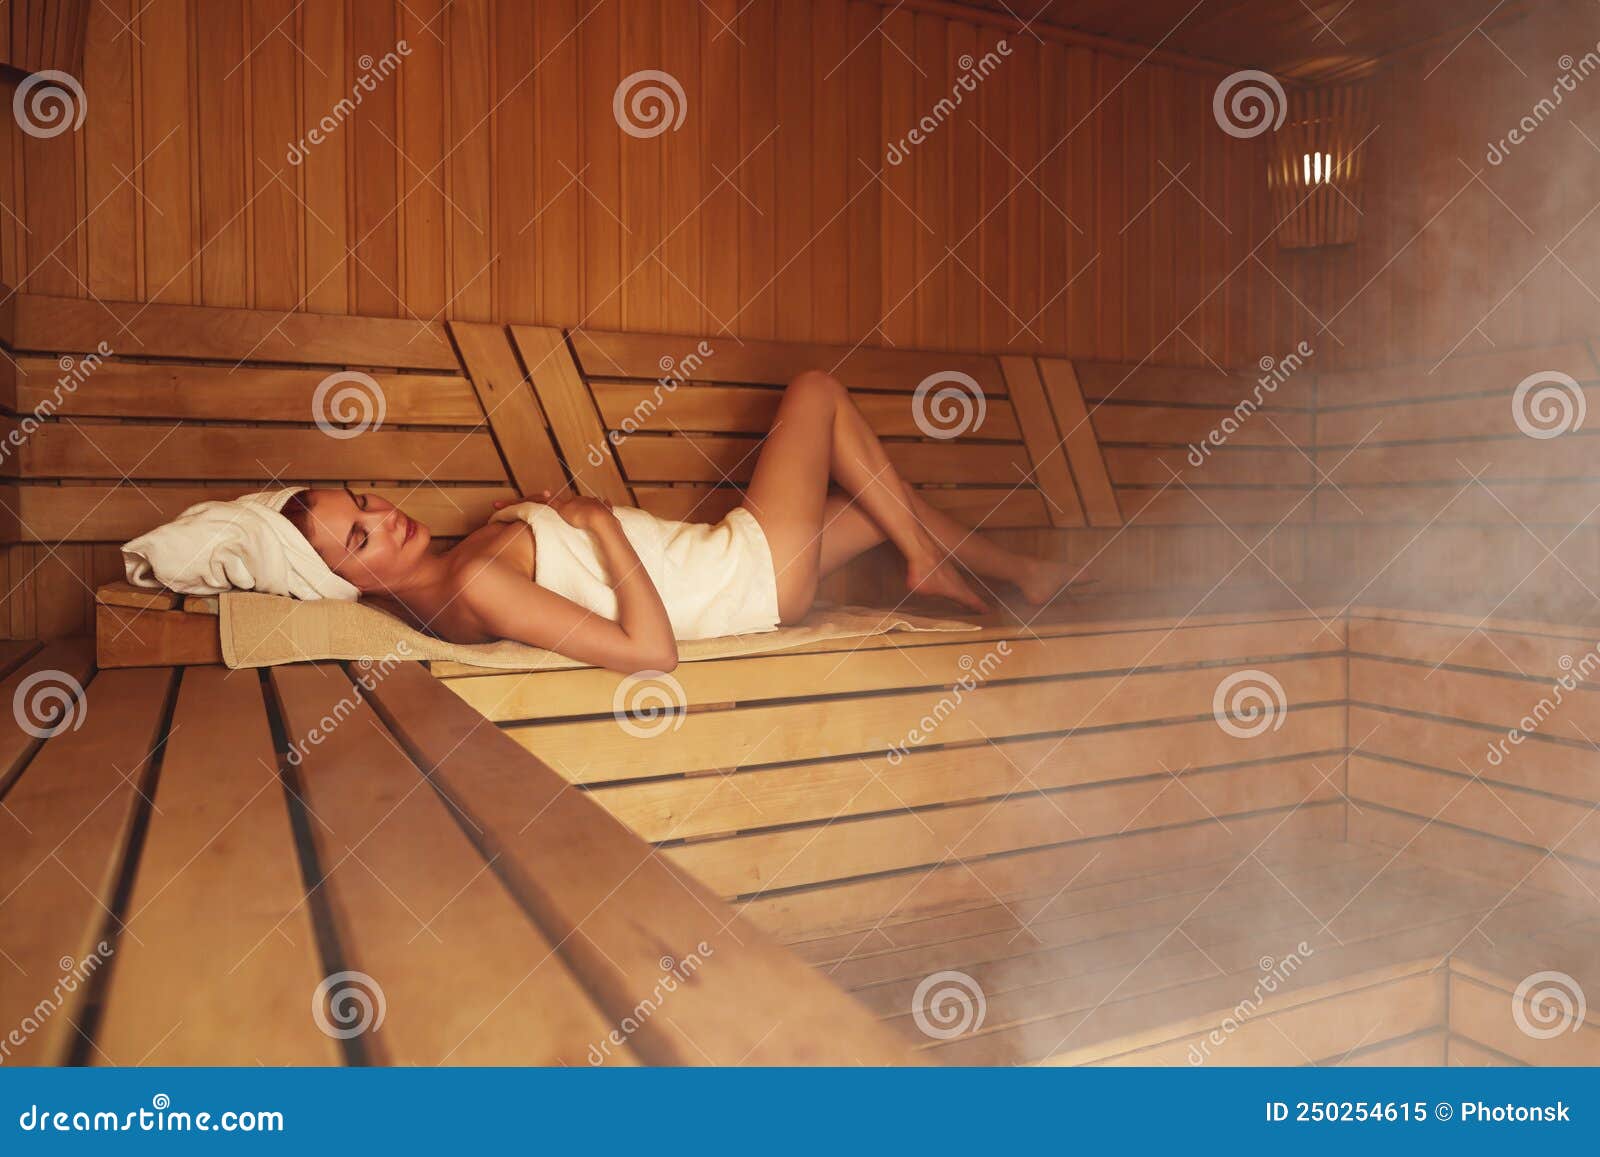 Young Woman Relaxing in a Sauna Dressed in a Towel. Interior of